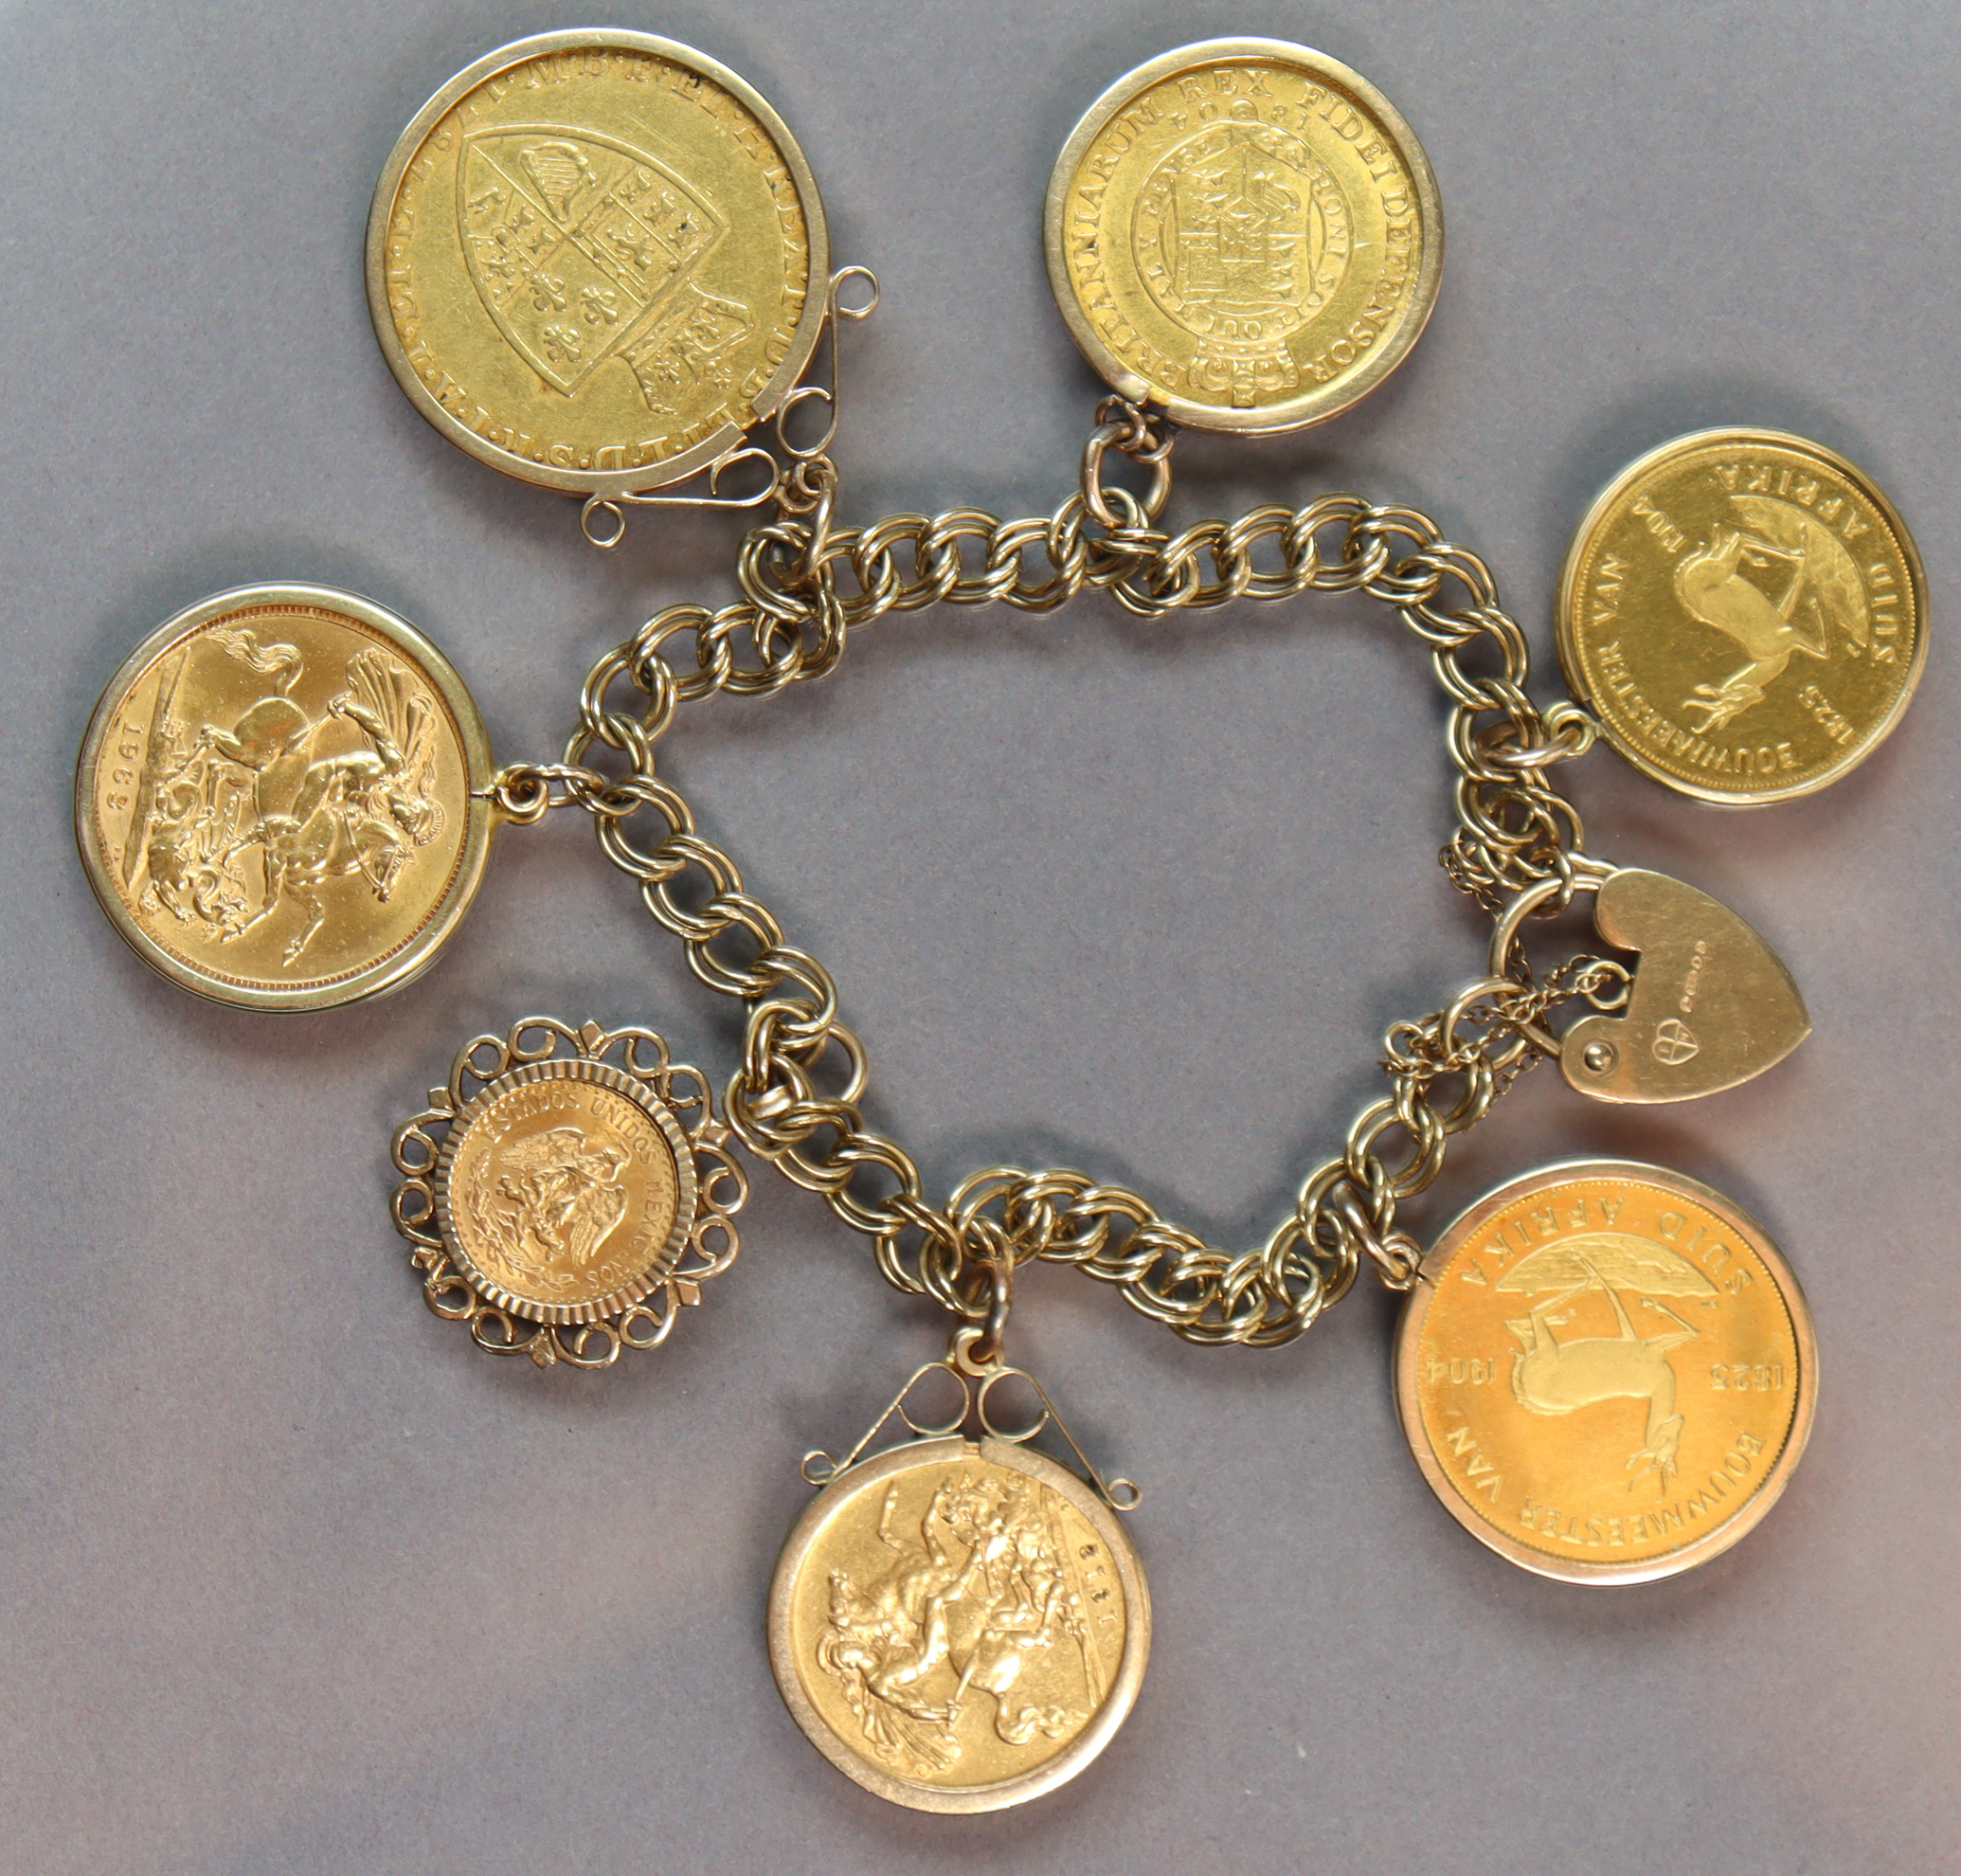 A 9ct. gold bracelet of double wire links & padlock clasp, with seven pendant gold coins: A George - Bild 2 aus 2